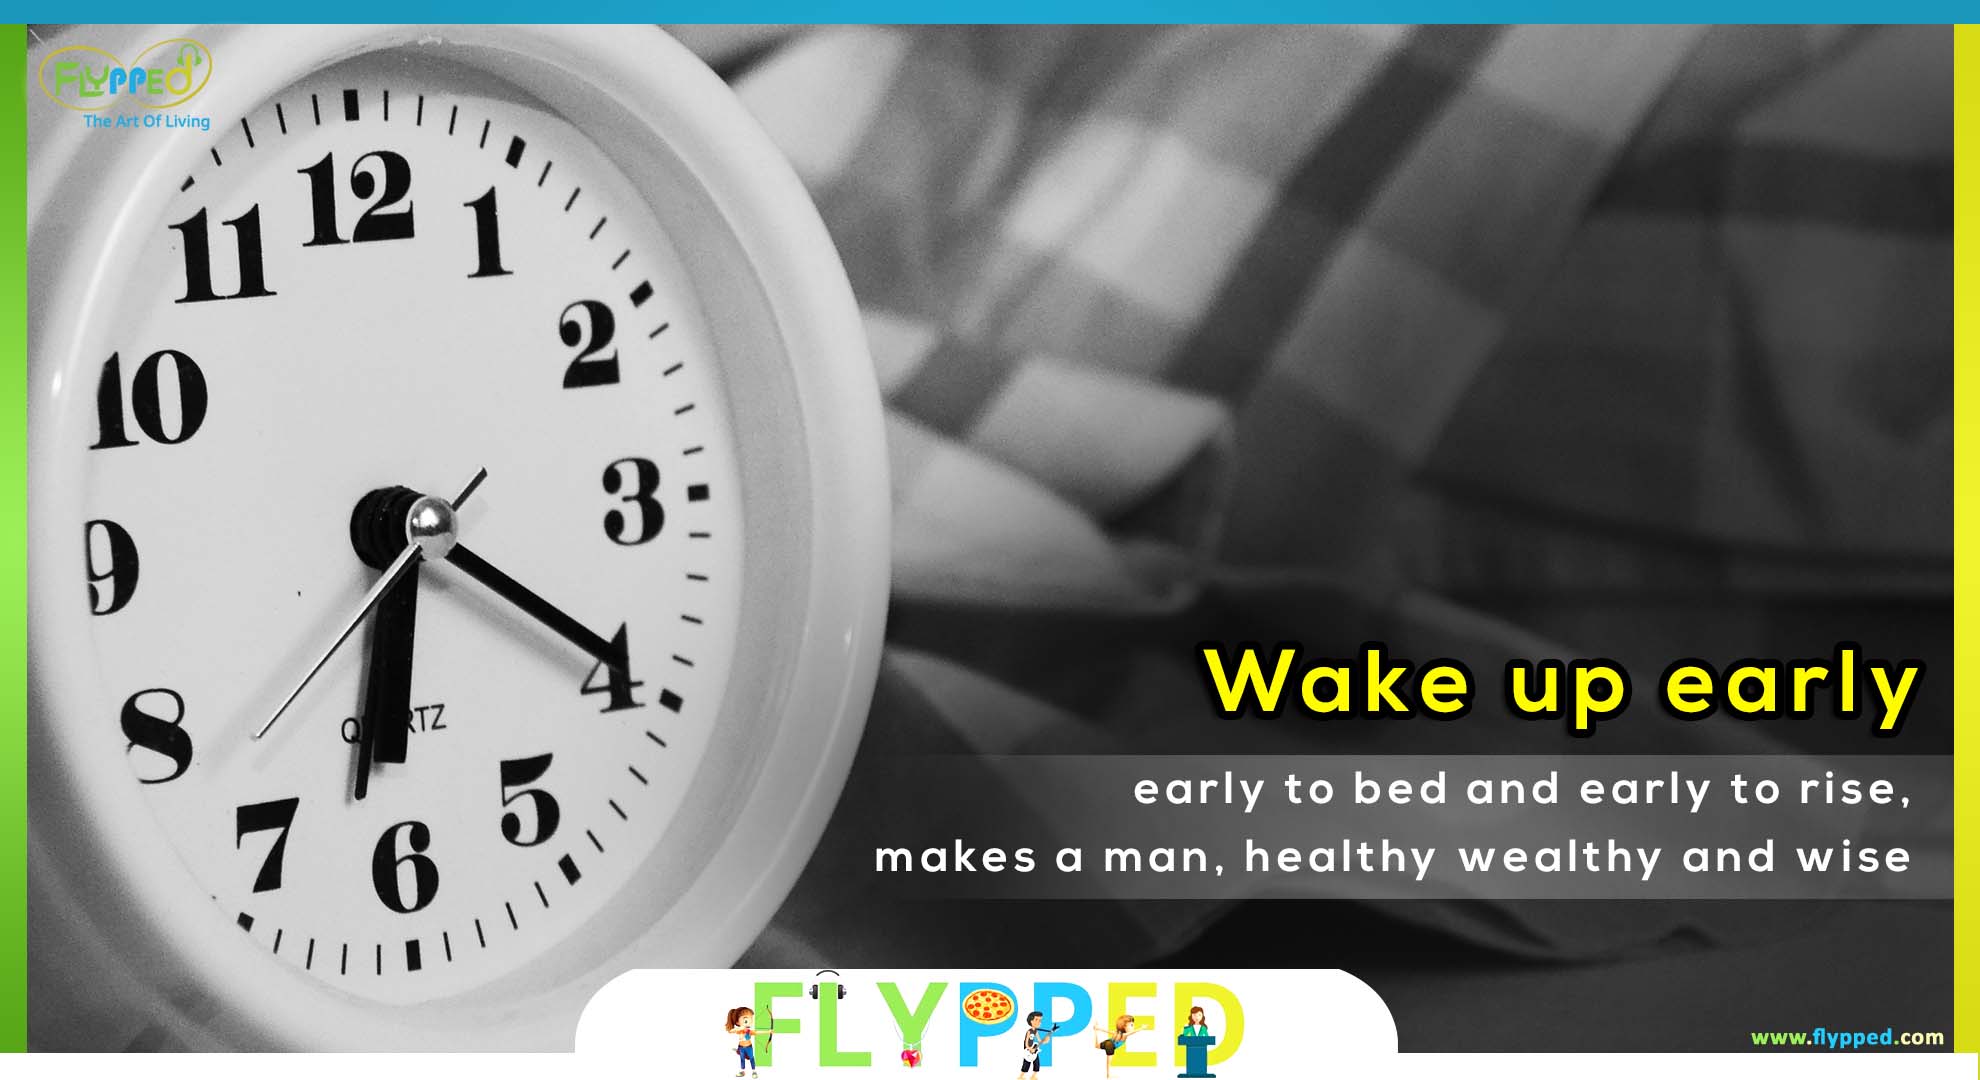 Tips-for-a-stress-free-life-wake-up-early